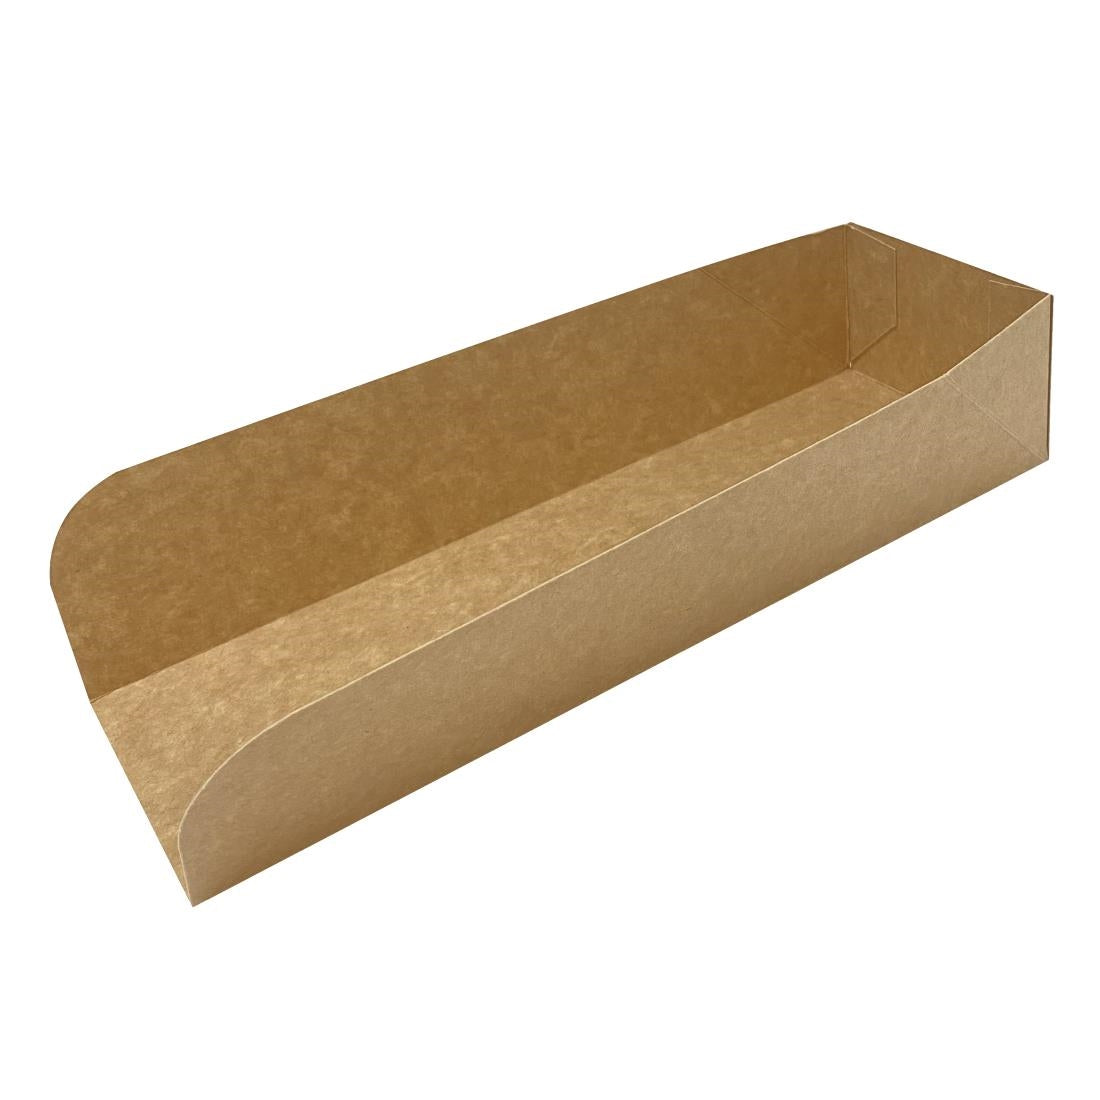 FT663 Fiesta Recyclable Hot Dog Tray Large (Pack of 500) JD Catering Equipment Solutions Ltd